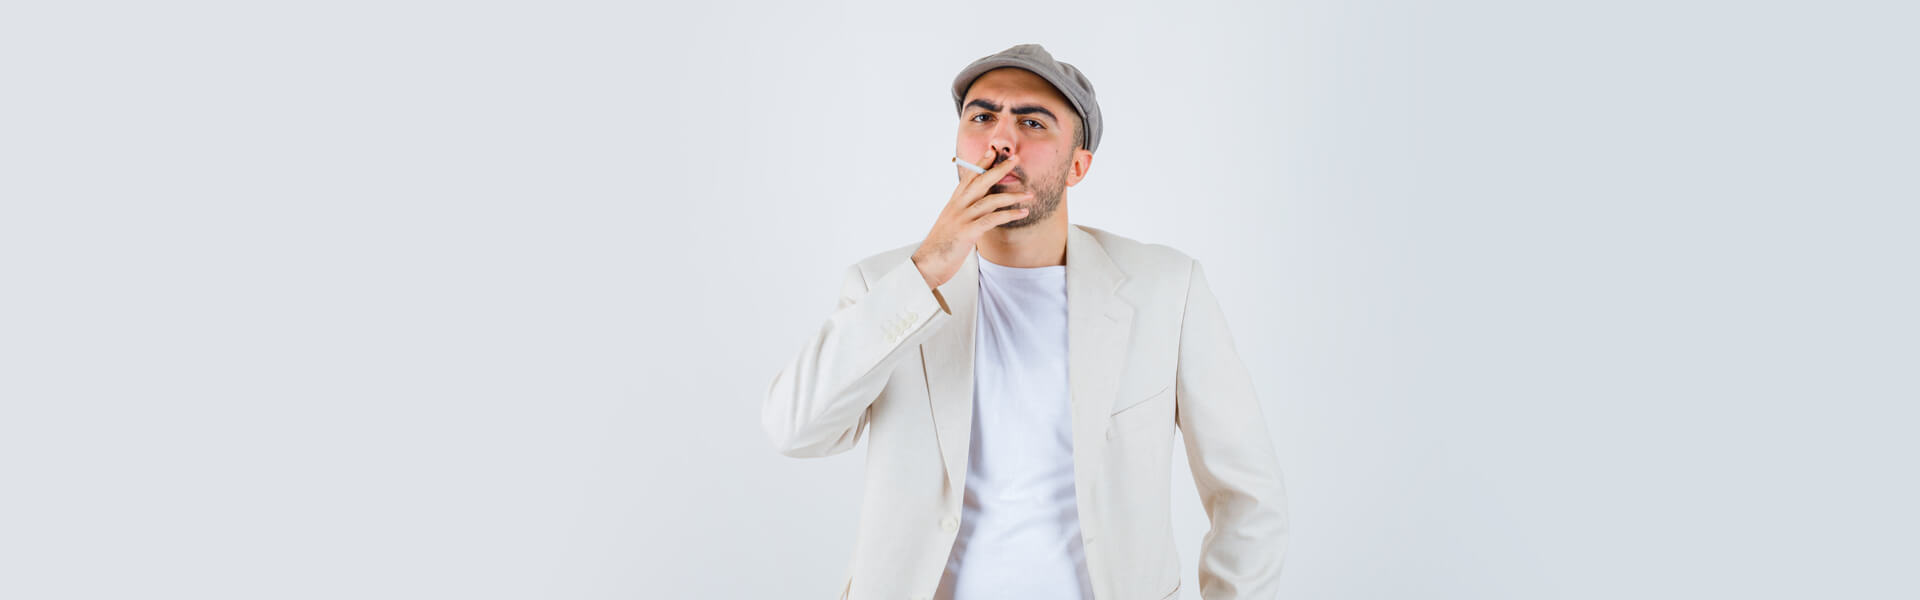 How is Oral Health Affected by Smoking And Vaping?